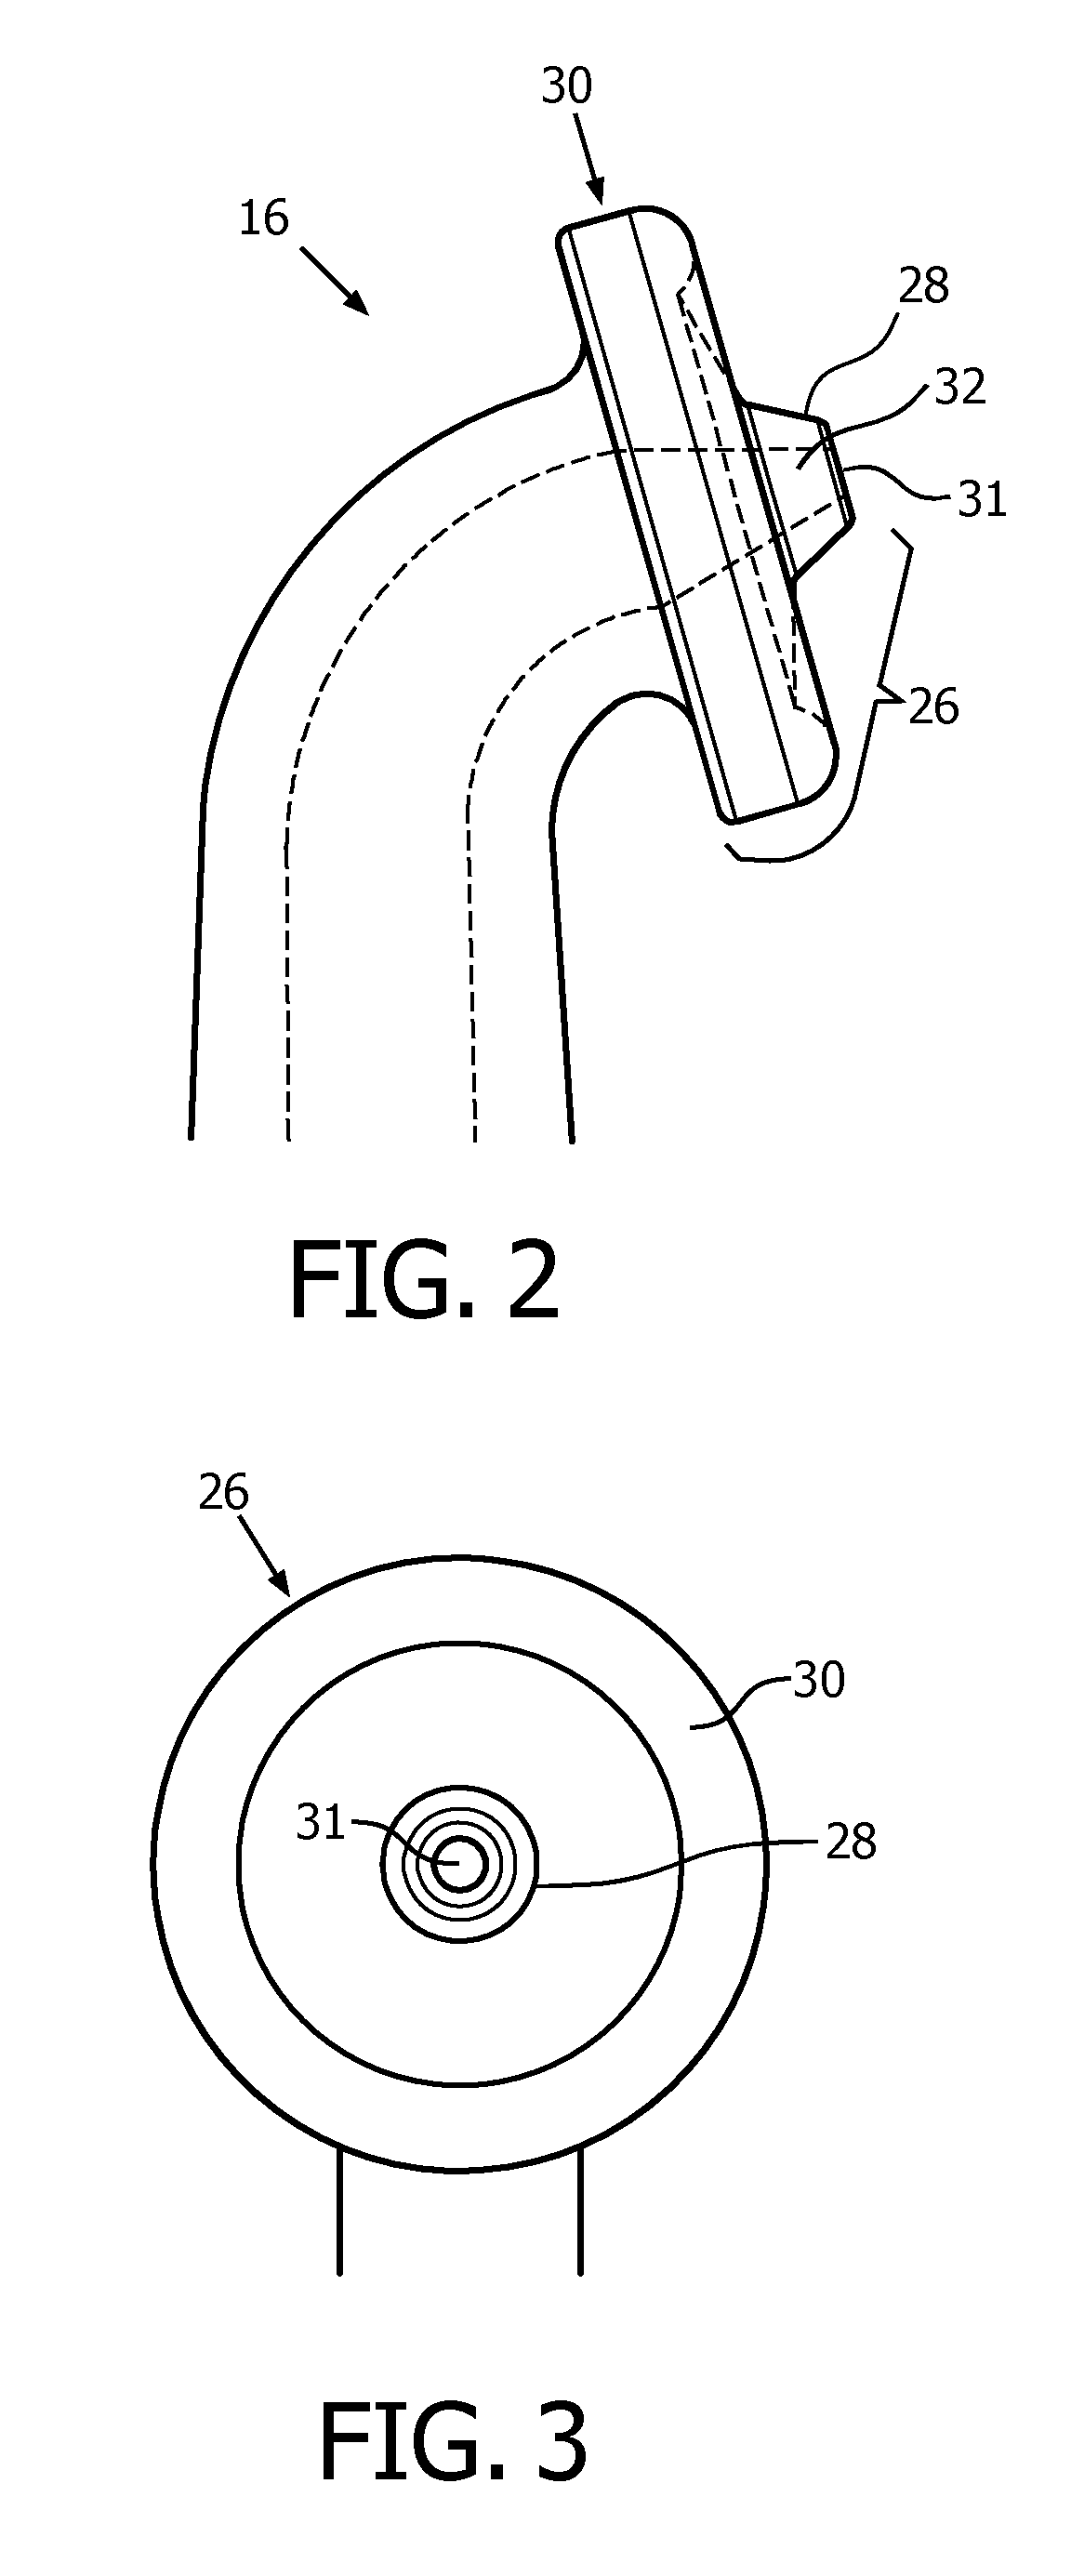 Adjustable assembly and nozzle for providing various liquid/air output flow patterns